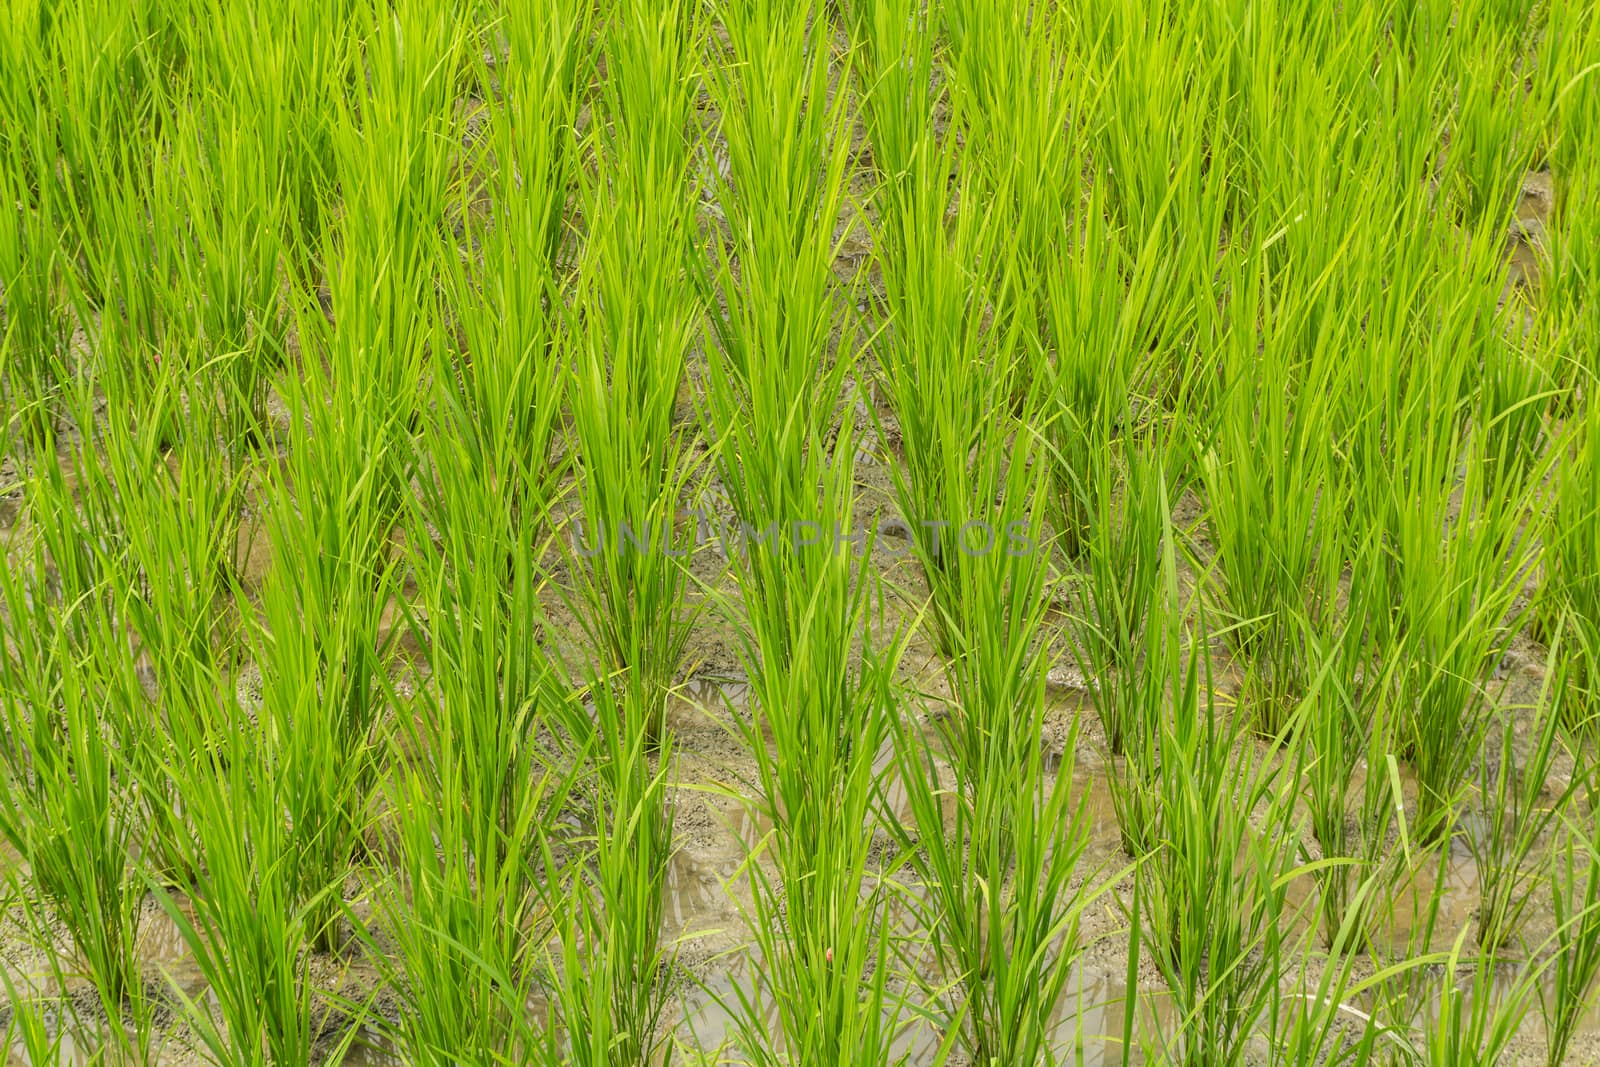 Paddy rice fields waiting for harvest growing